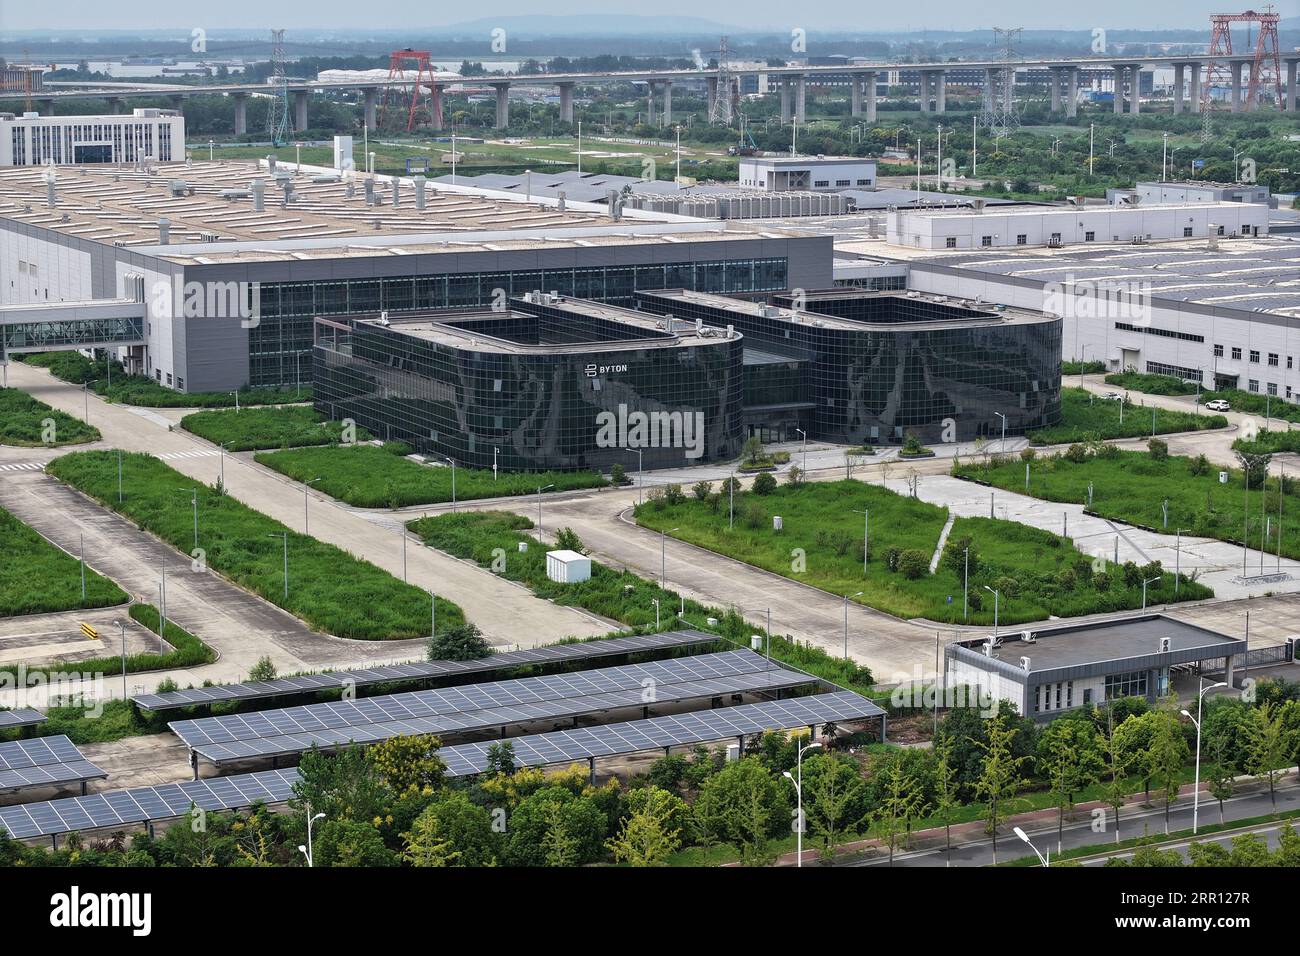 NANJING, CHINA - SEPTEMBER 6, 2023 - An aerial photo shows the nearly deserted headquarters of Byton's new energy vehicle plant in Nanjing, Jiangsu pr Stock Photo